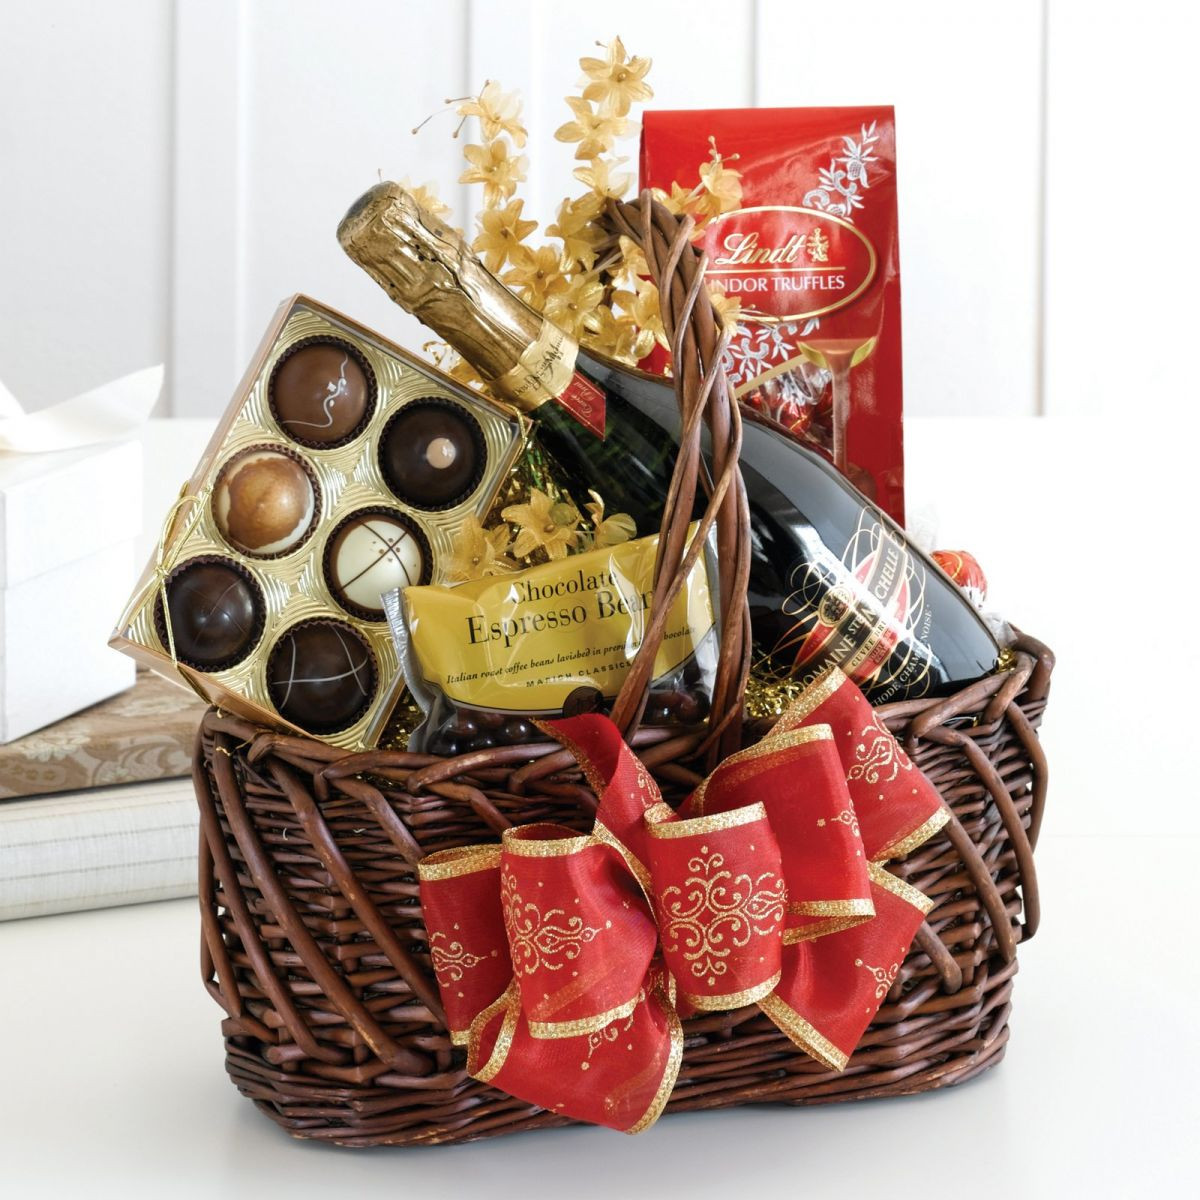 Top 10 Chocolate Gift Basket Ideas
 17 Baskets Anomalous n Some Classic Christmas Gift Hamper